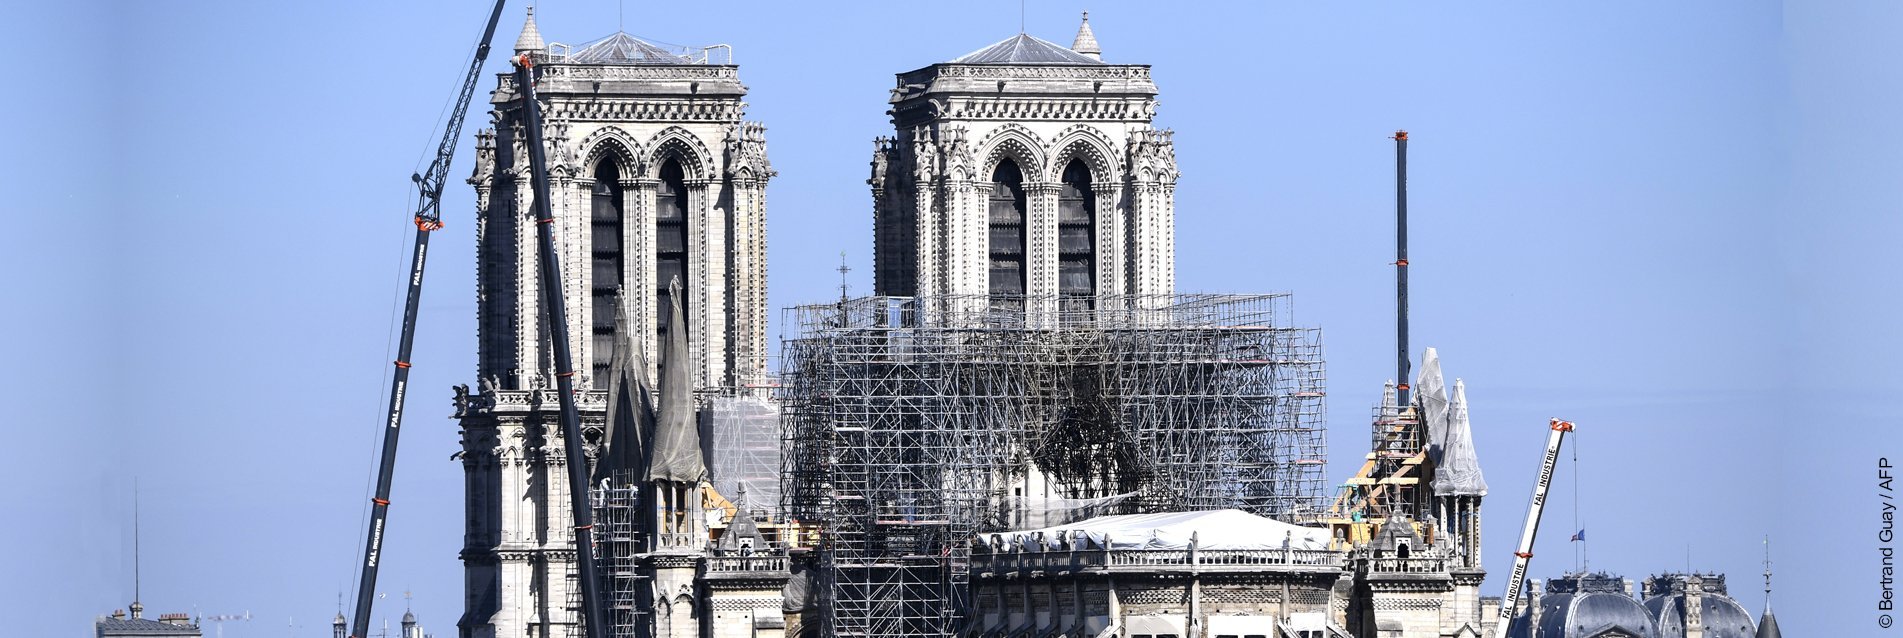 Notre-Dame Cathedral fire: two years later